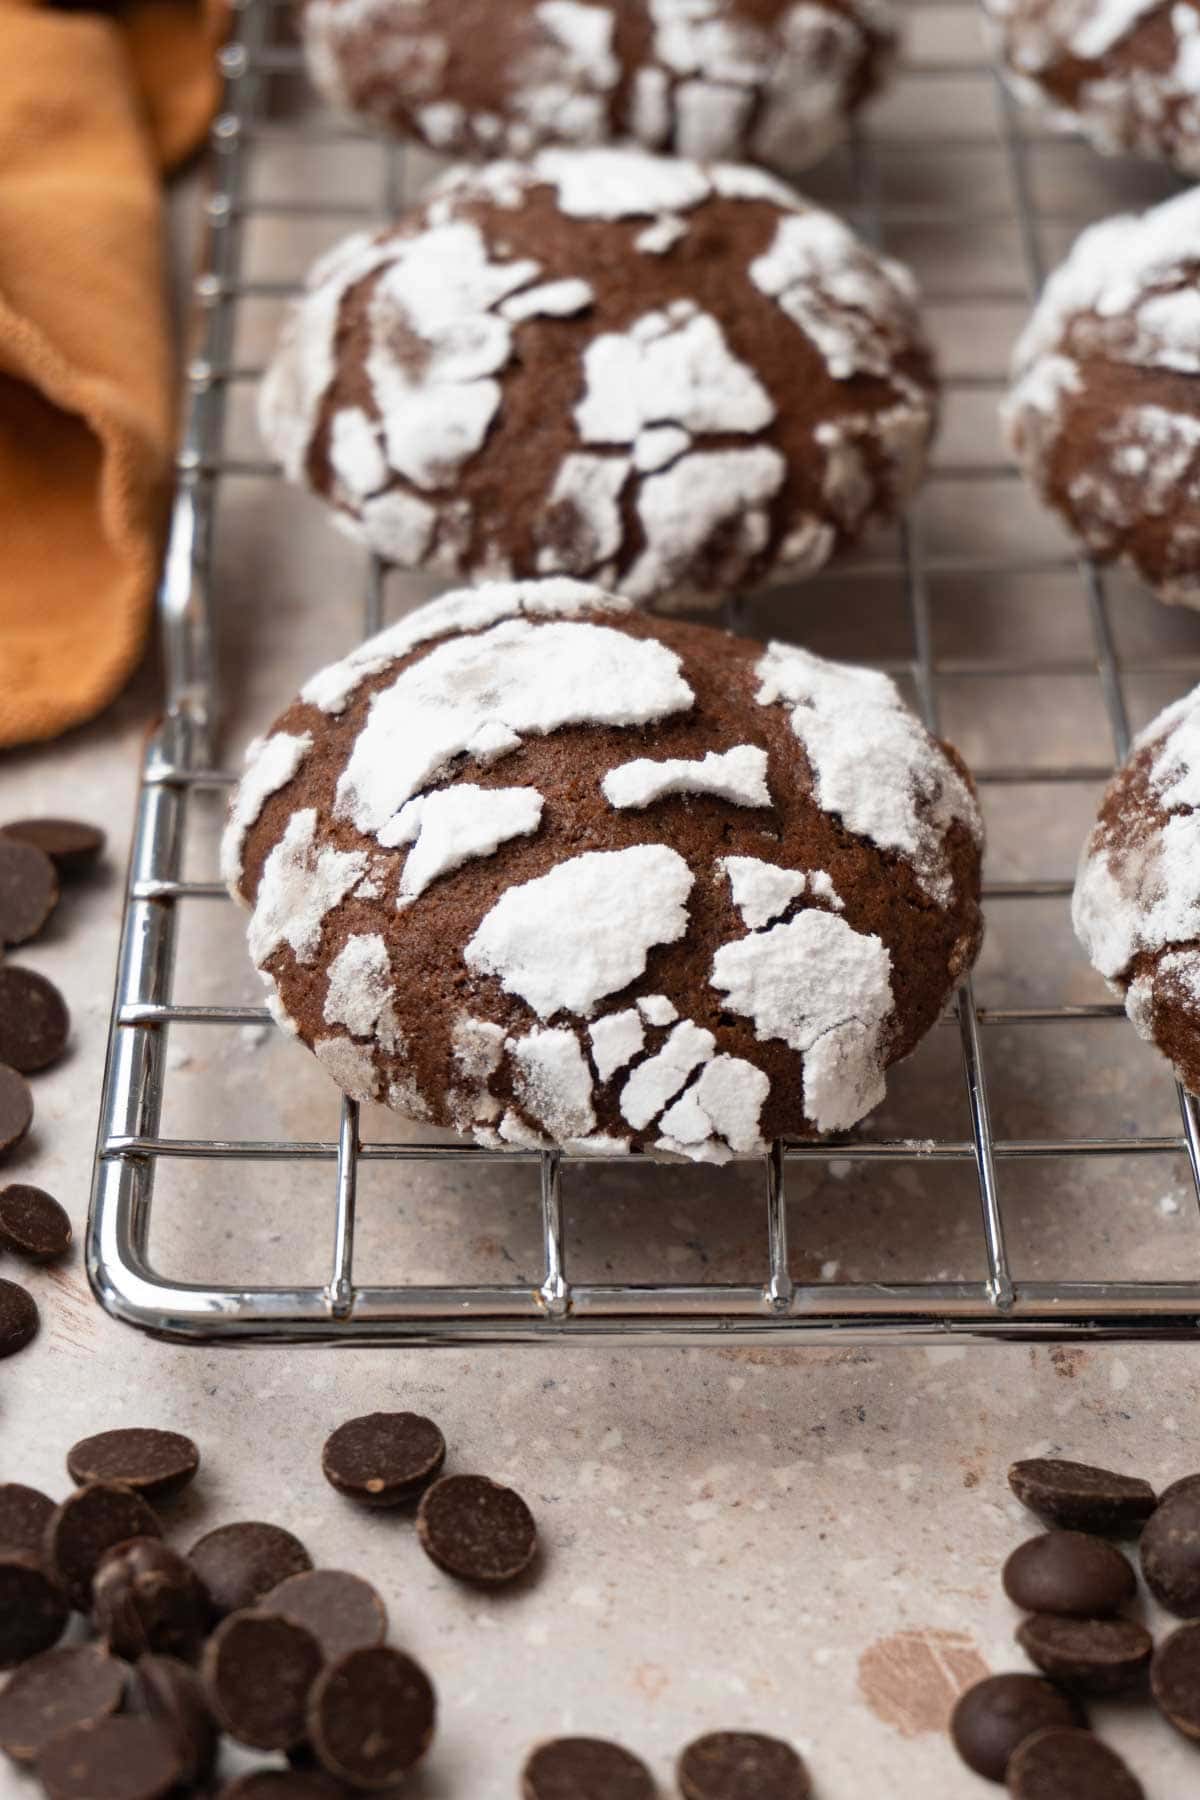 Chocolate cookies covered in powdered sugar are on a cooling rack. Chocolate chips are lying around.